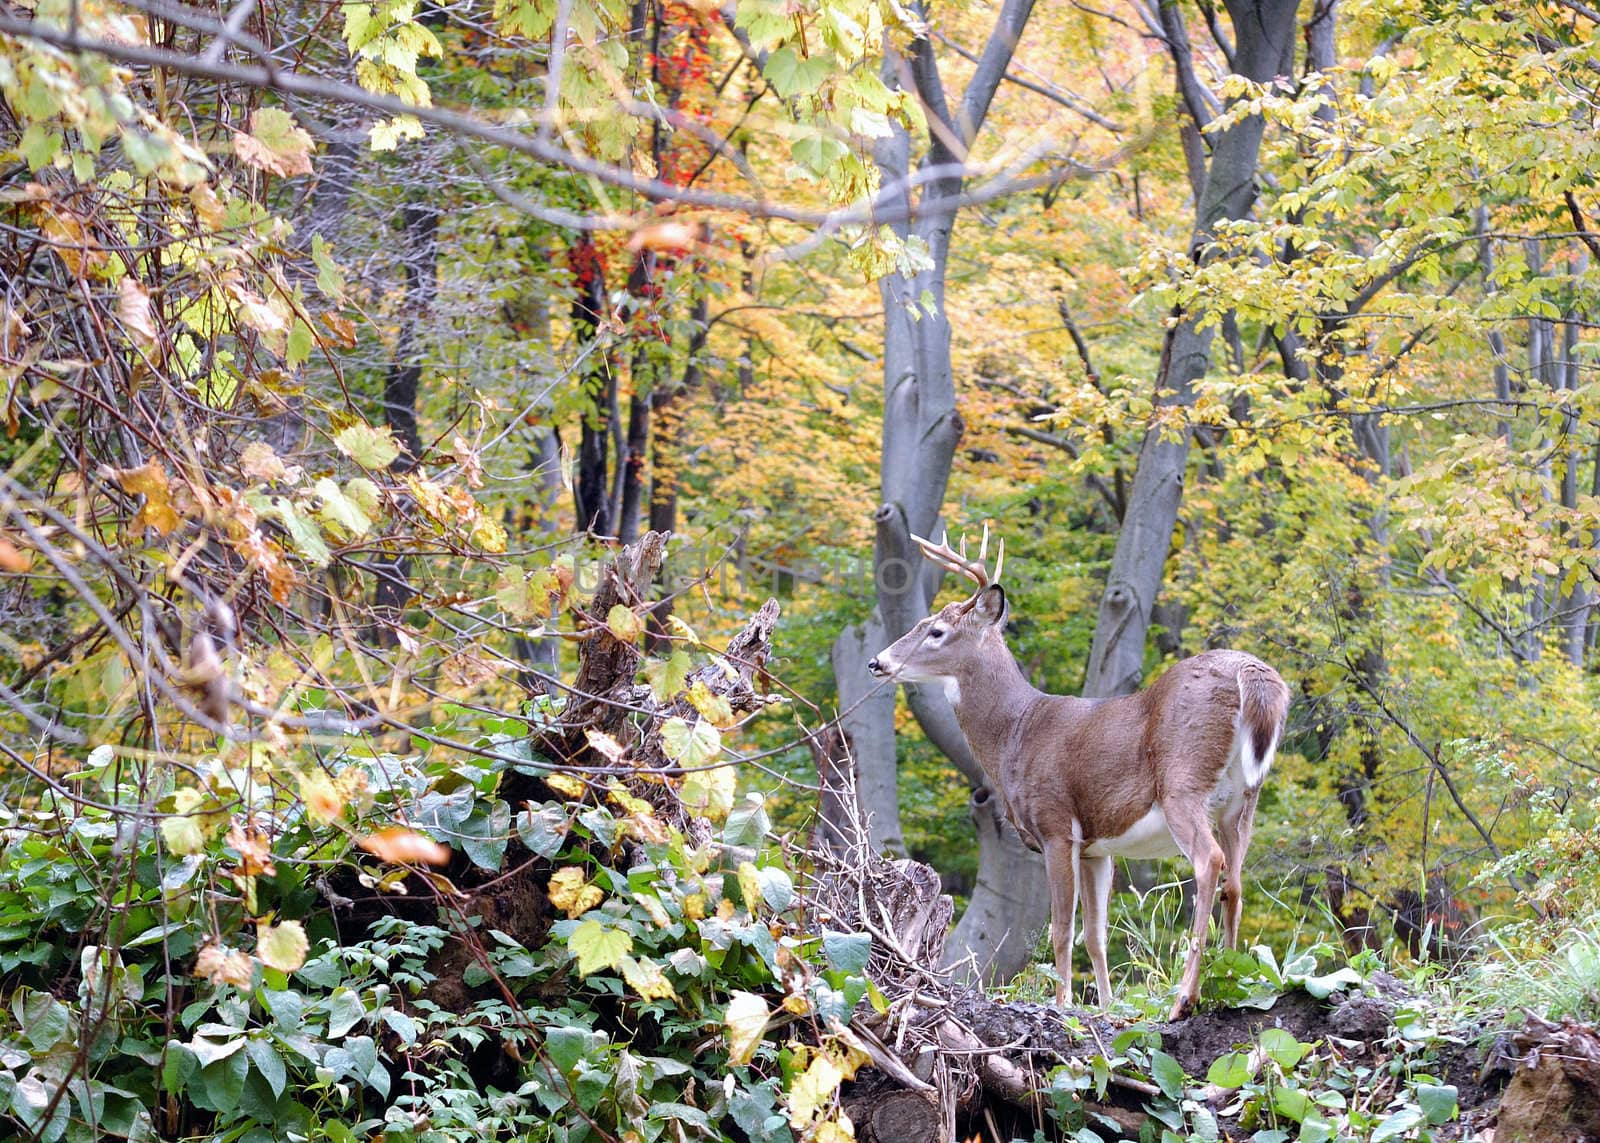 A whitetail deer standing on a mound in a woods in the rutting season,